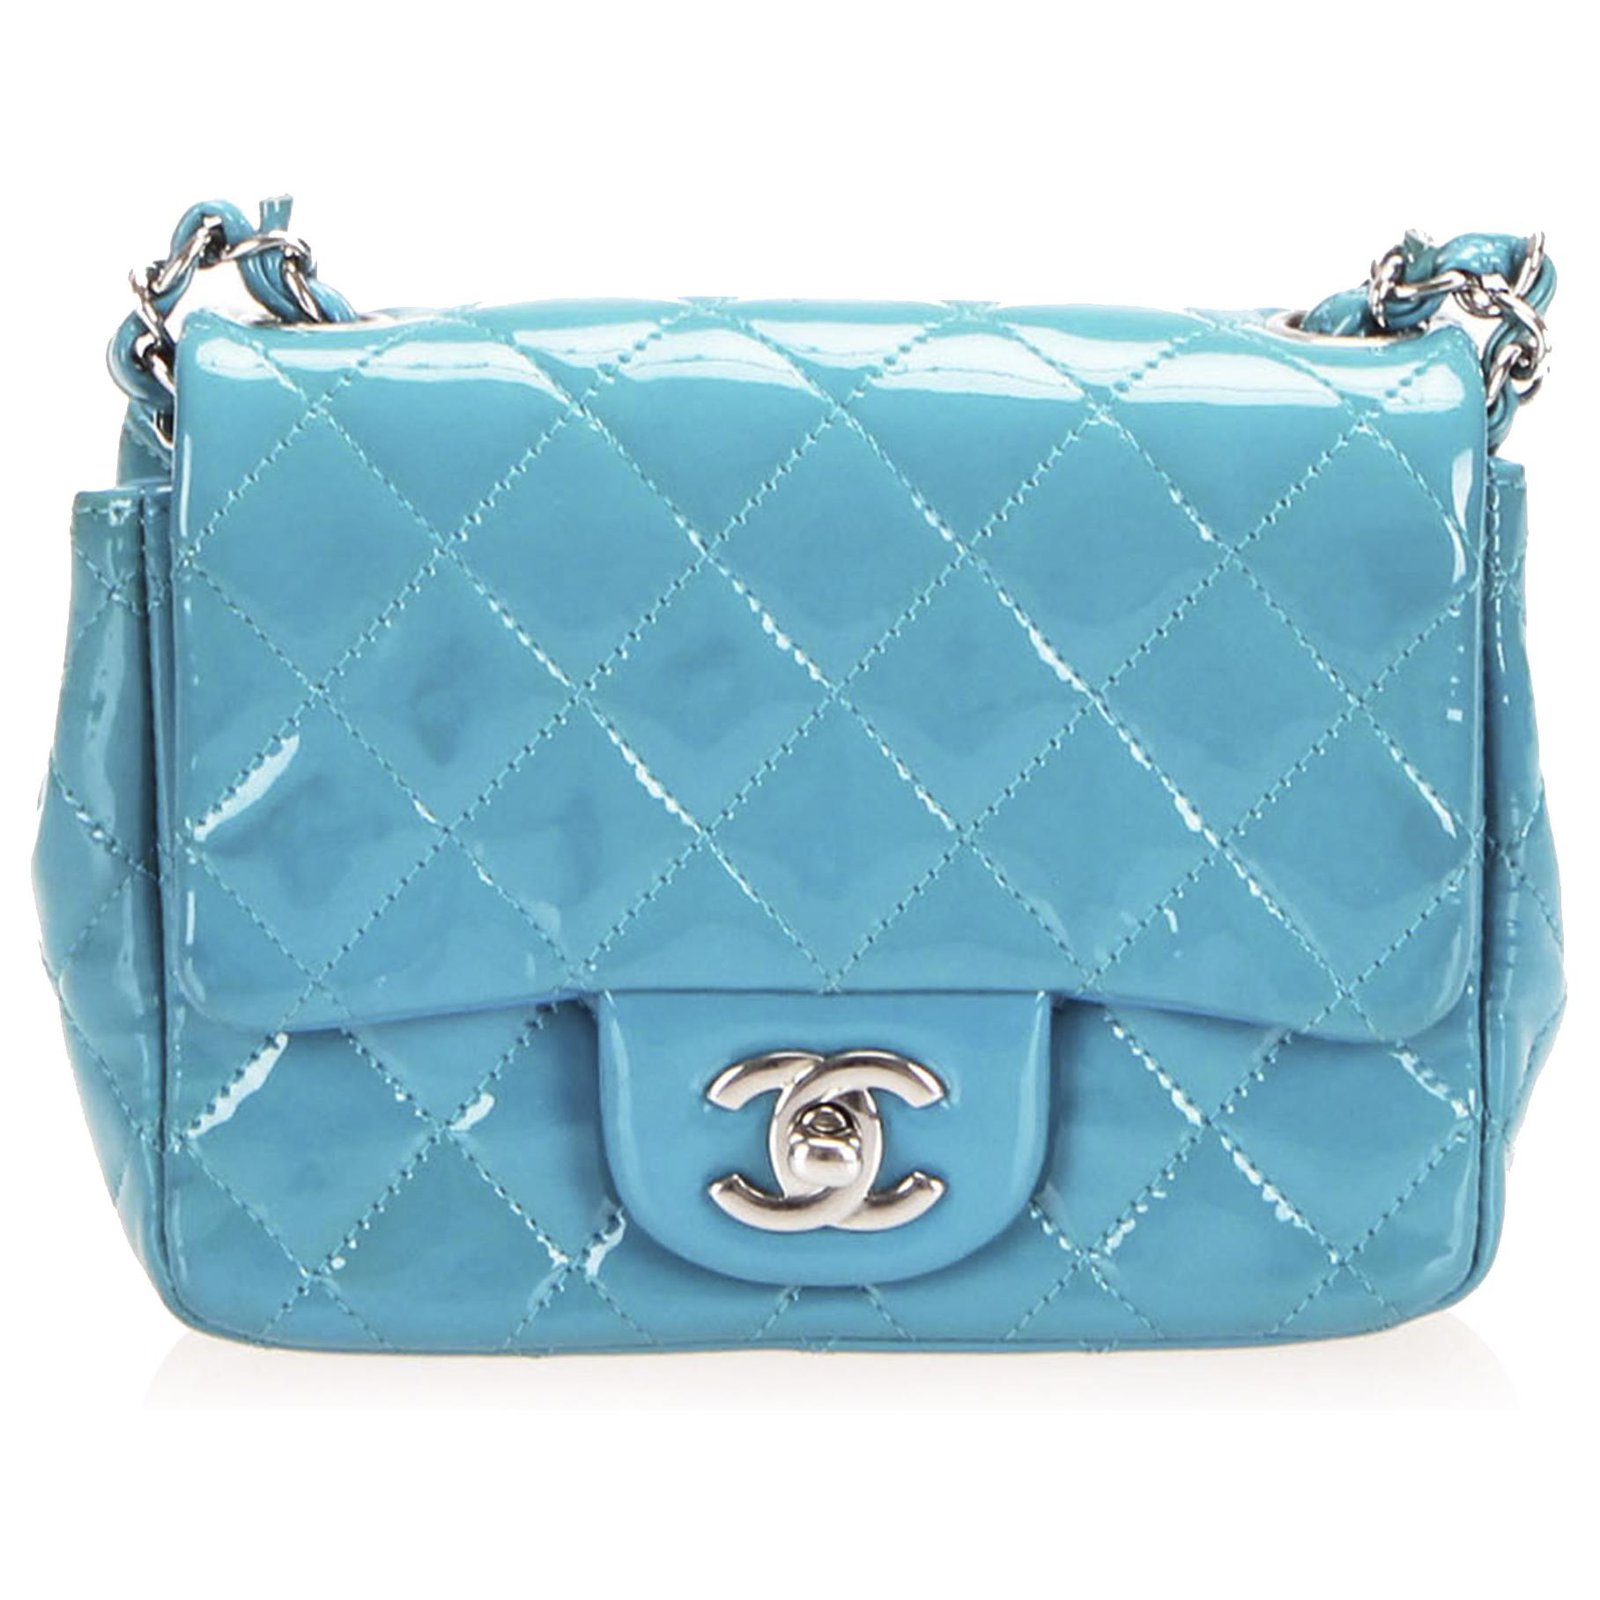 Chanel Light Green Quilted Patent Leather Mini Square Classic Single Flap  Chanel